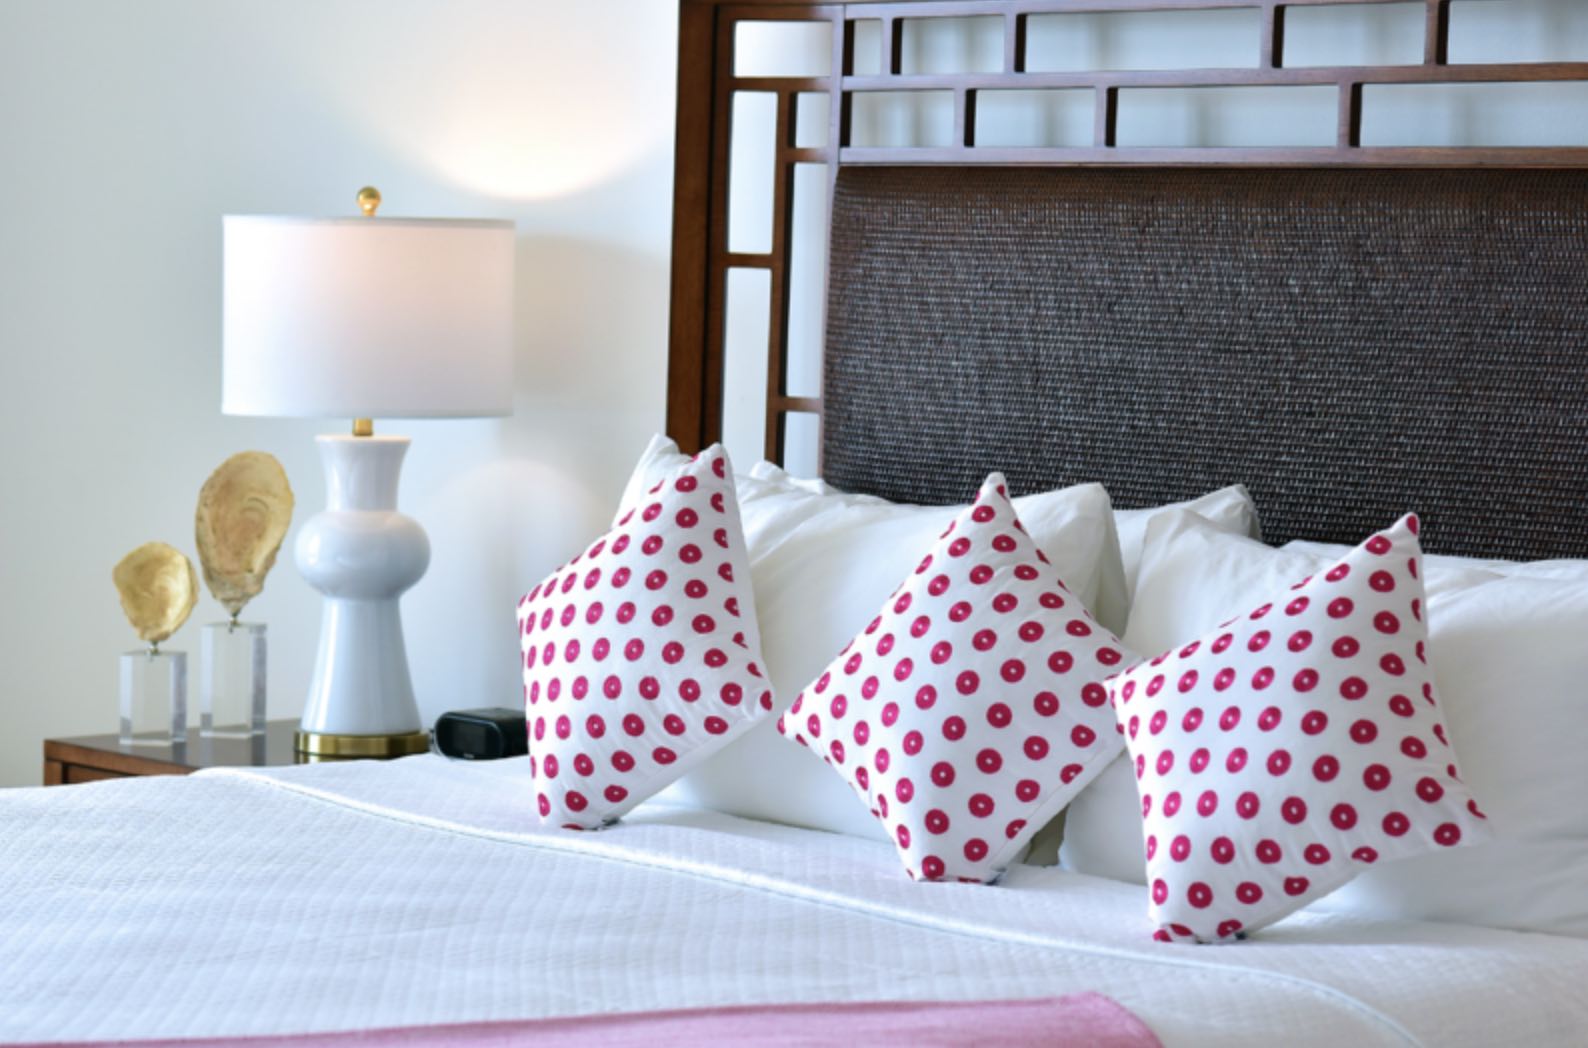 The tasteful decor at the Coral Beach Club showing bed with pink dotted cushions